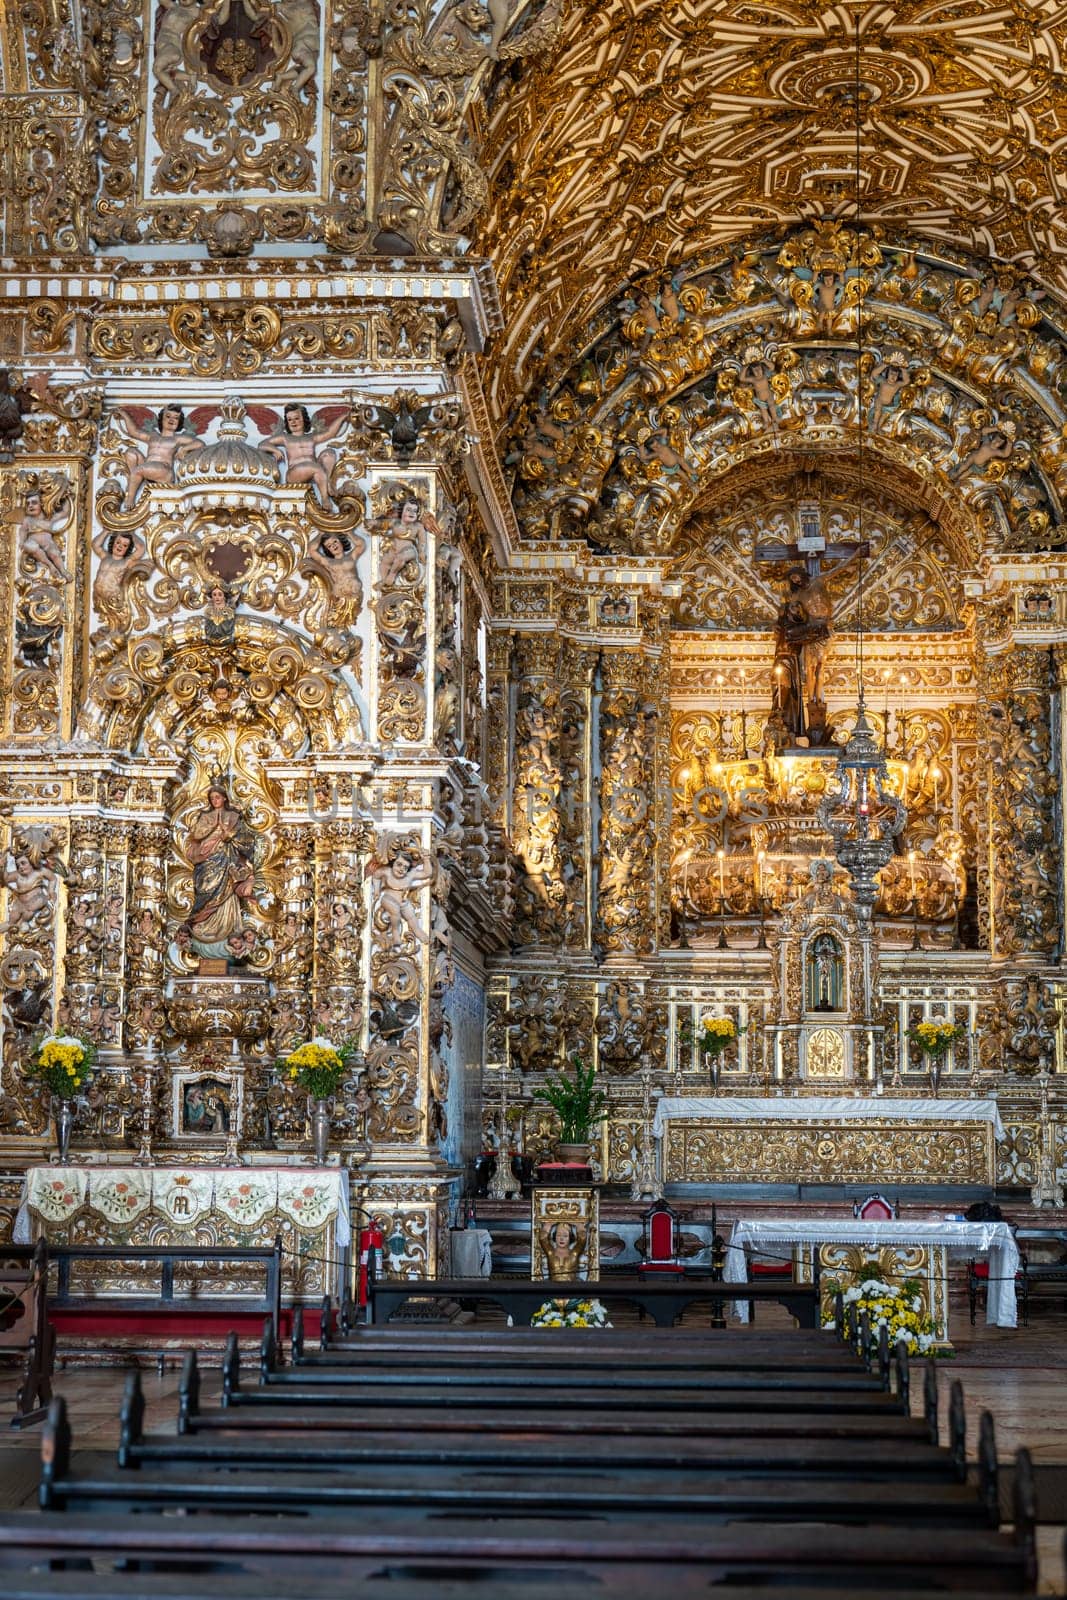 Baroque altar with gold leaf and wood carvings in a historic church.